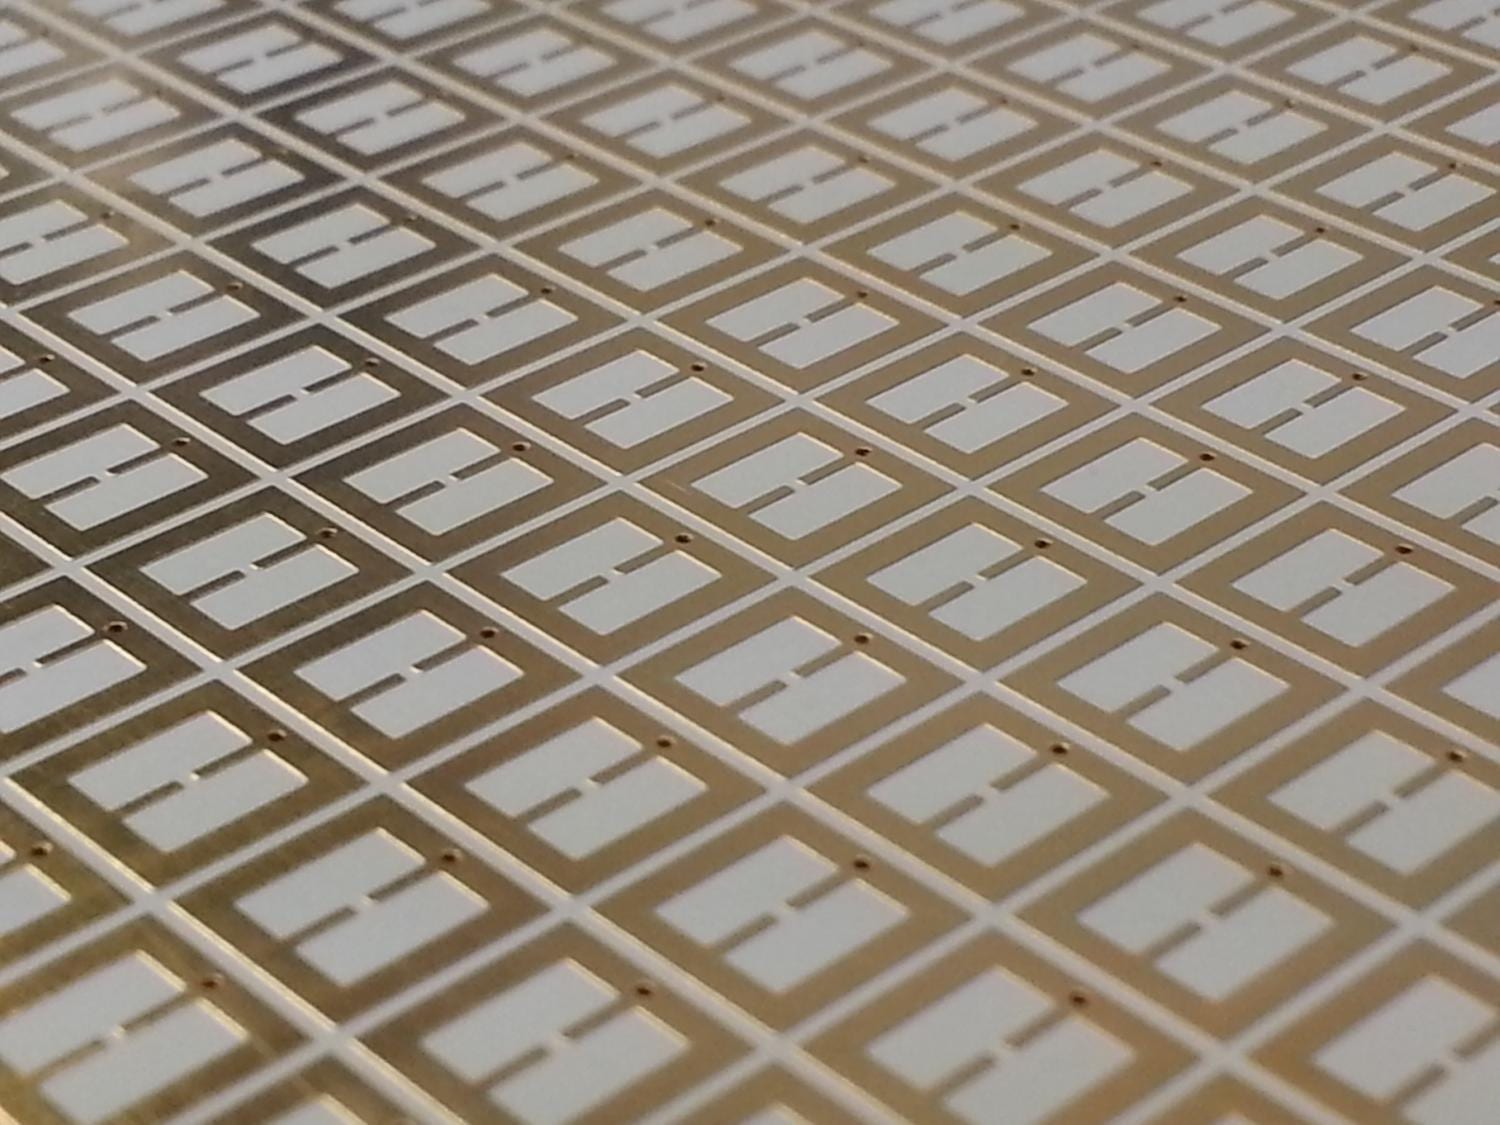 Printing Silicon on Paper, with Lasers